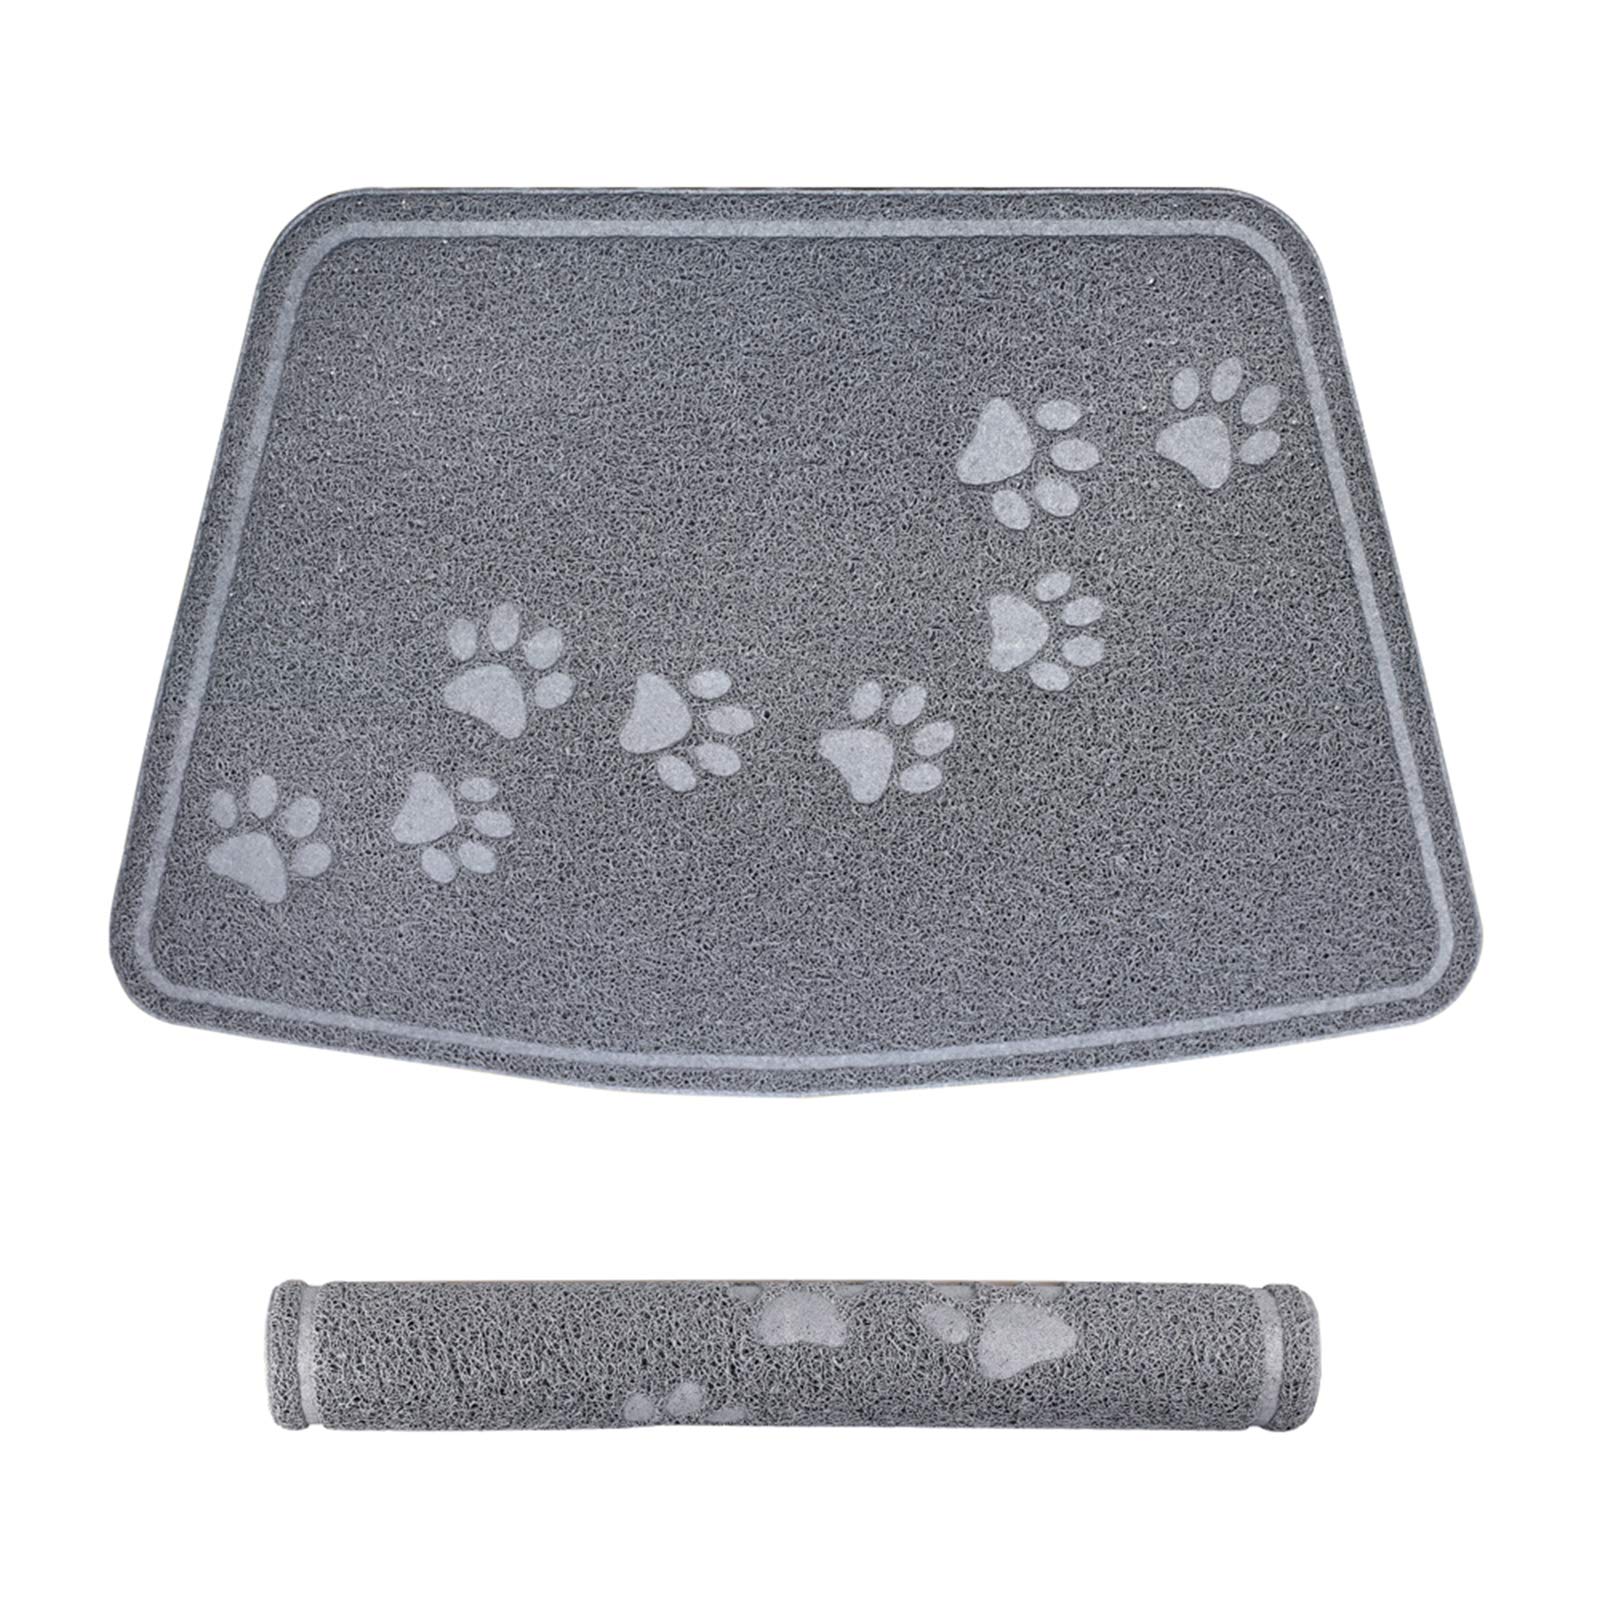 Cats Waterproof Dog Bowl Mat for Floor with Non Slip Backing